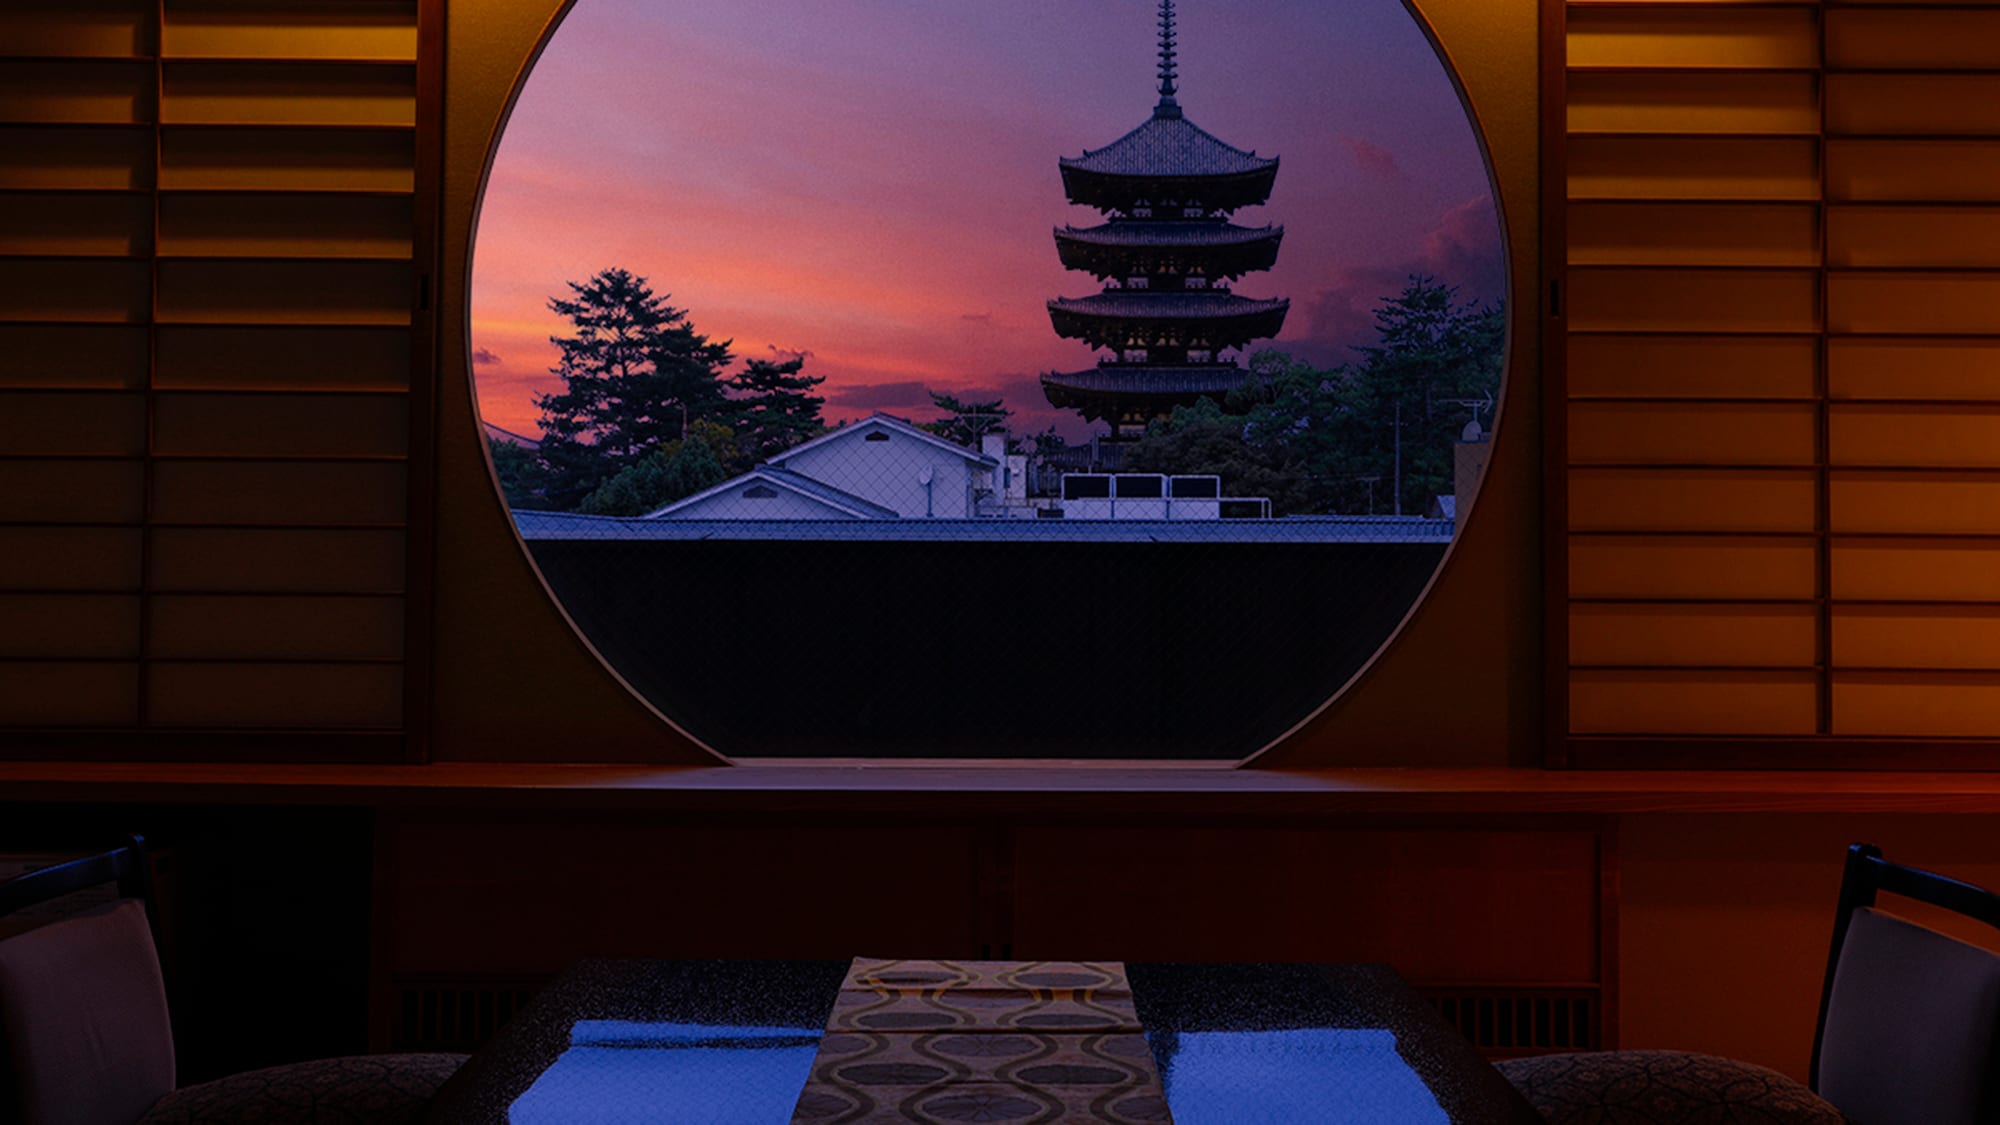 The five-storied pagoda creates a fantastic and majestic atmosphere by being lit up after sunset. Please take a look at the "special seats".